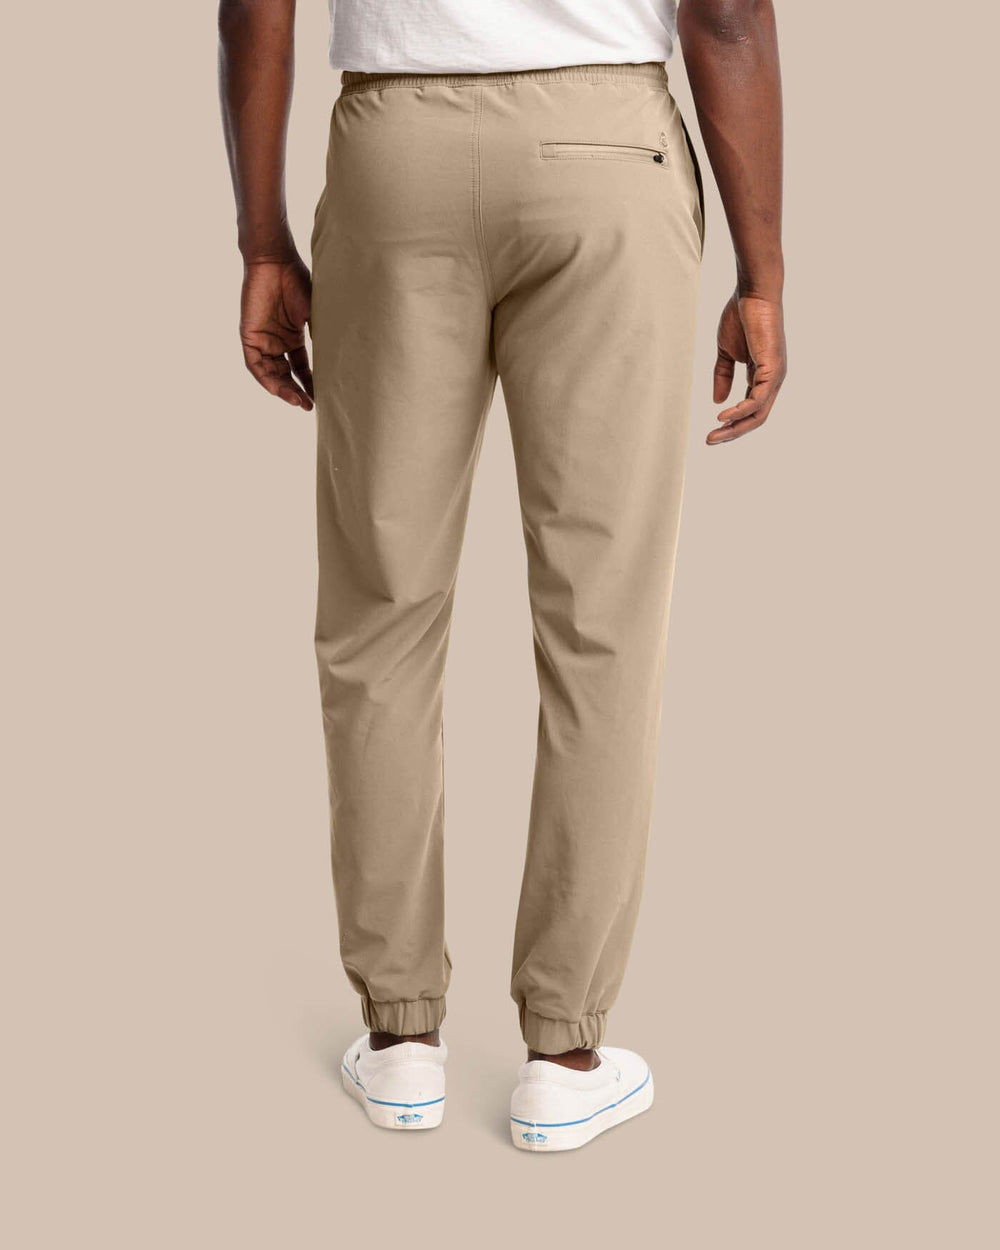 The back view of the Southern Tide The Excursion Performance Jogger by Southern Tide - Sandstone Khaki